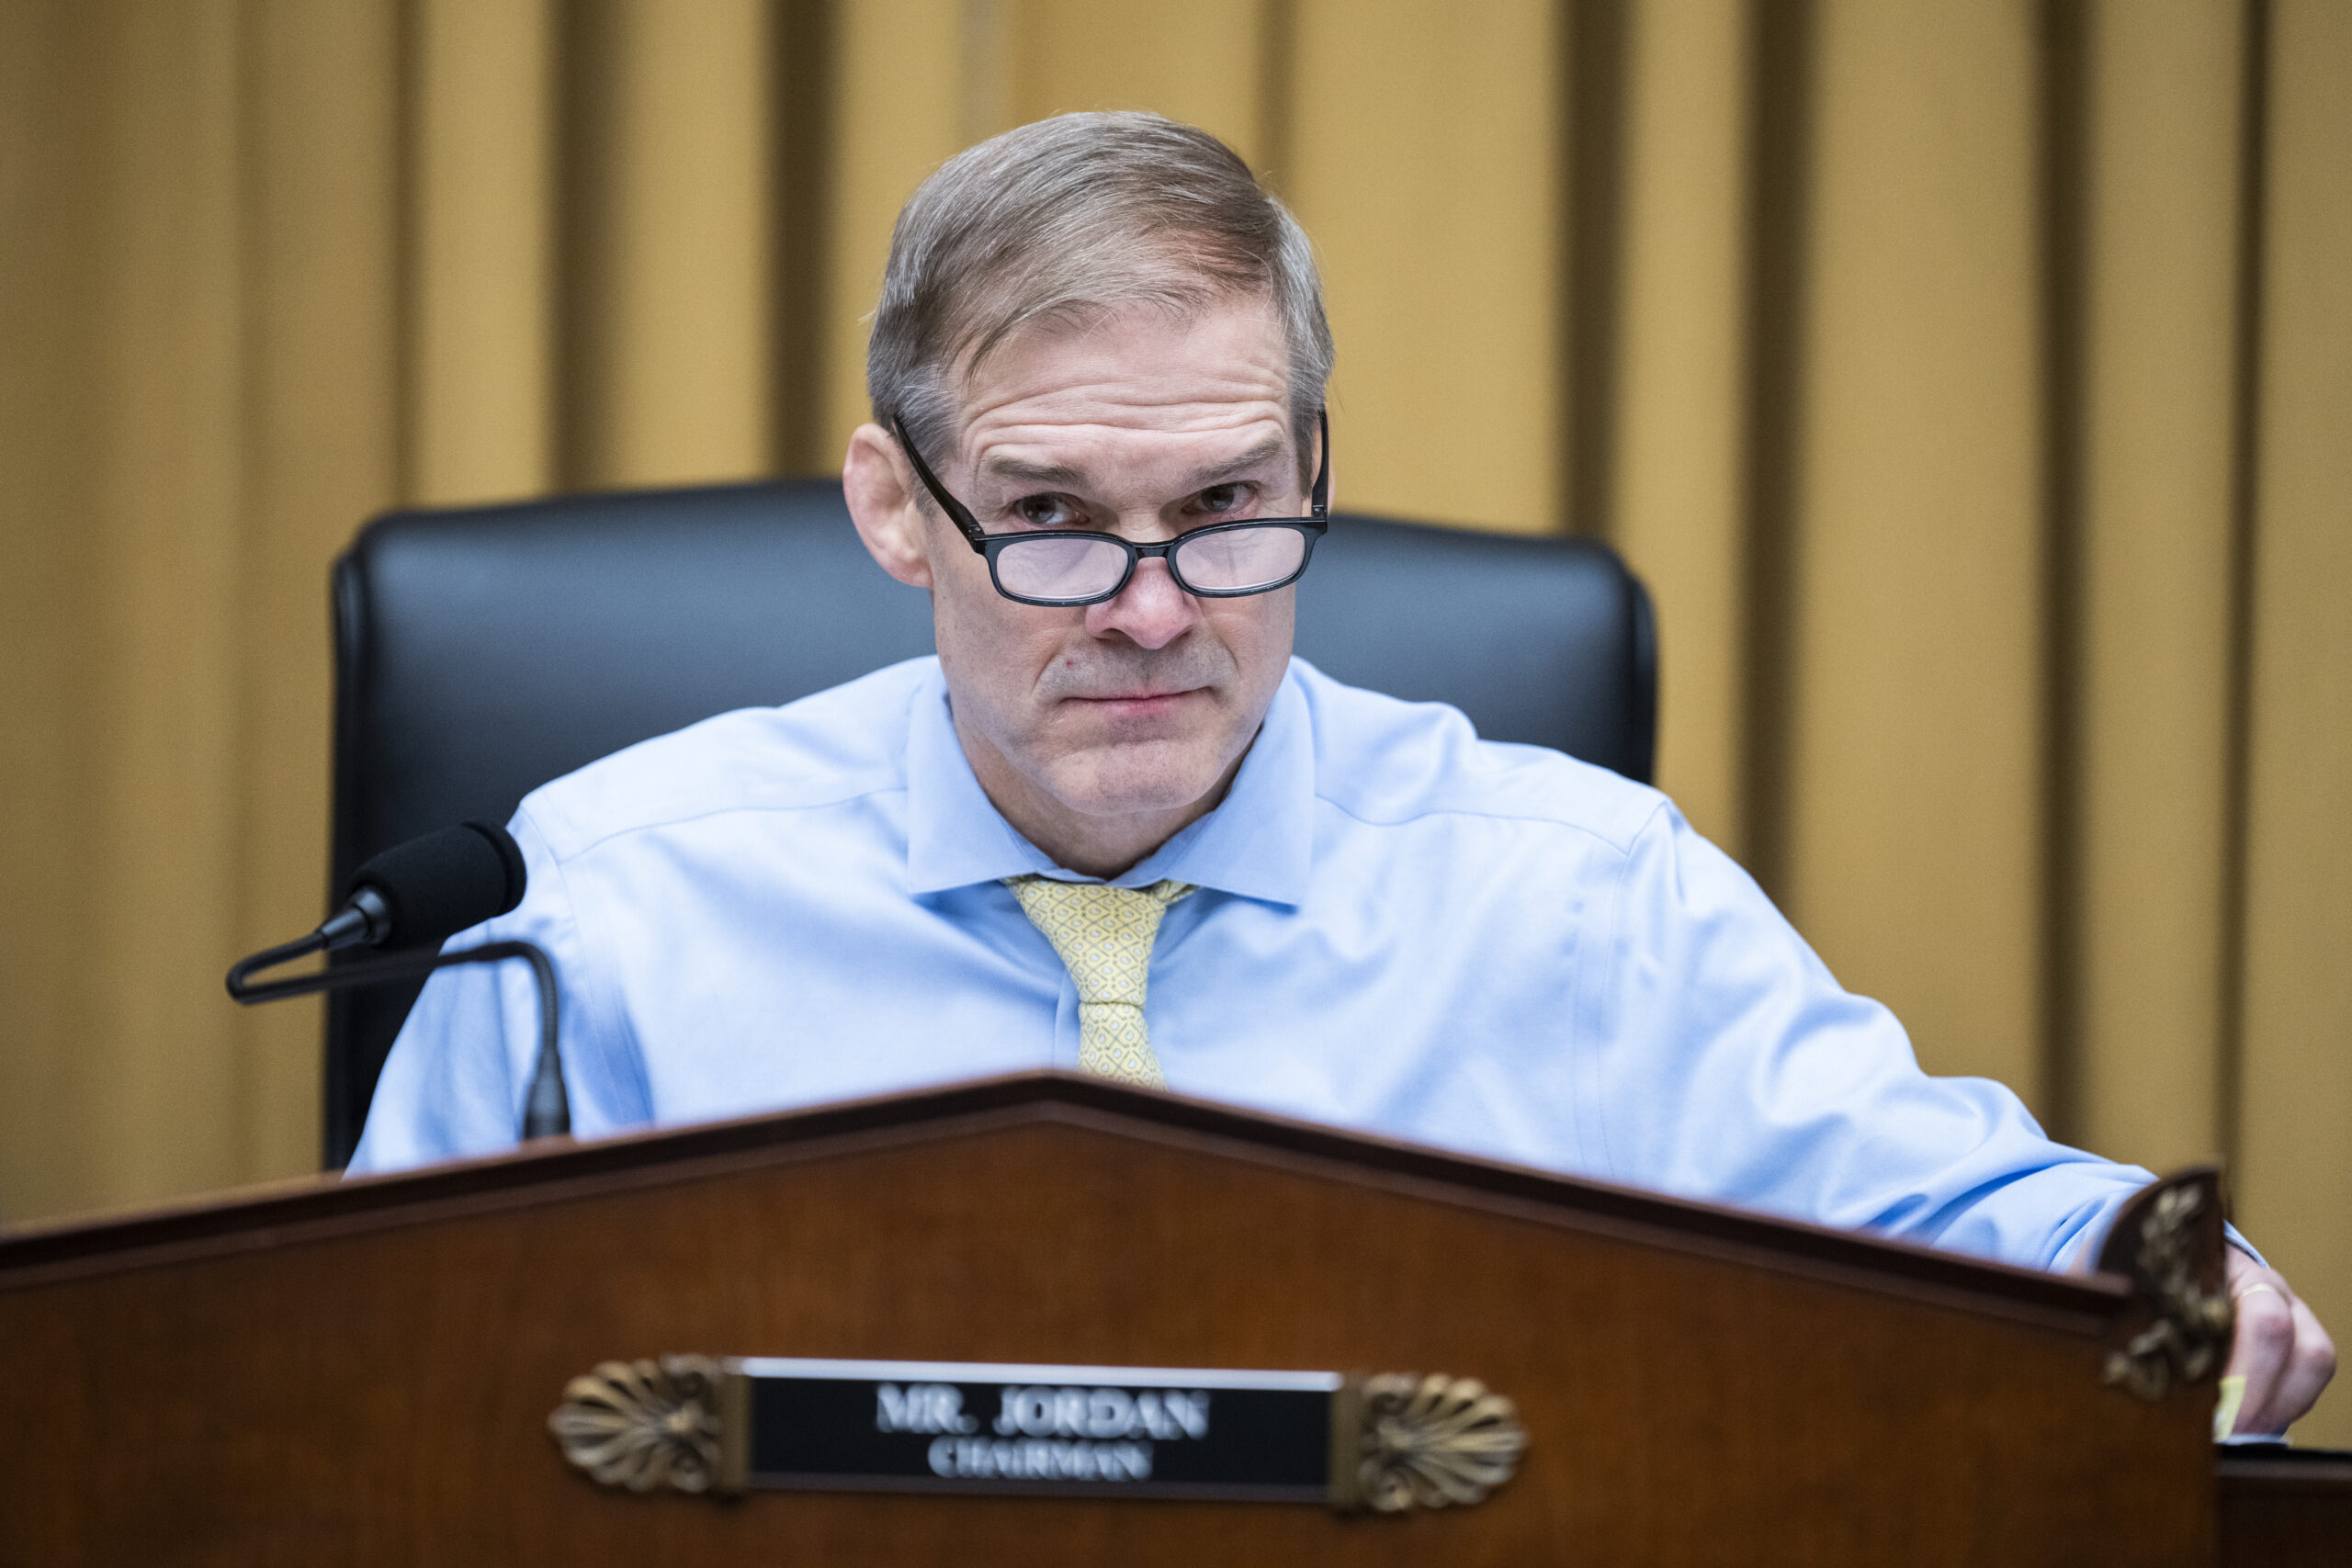 Could Jim Jordan Be In Legal Hot Water For Political Stunt? - Above the Law